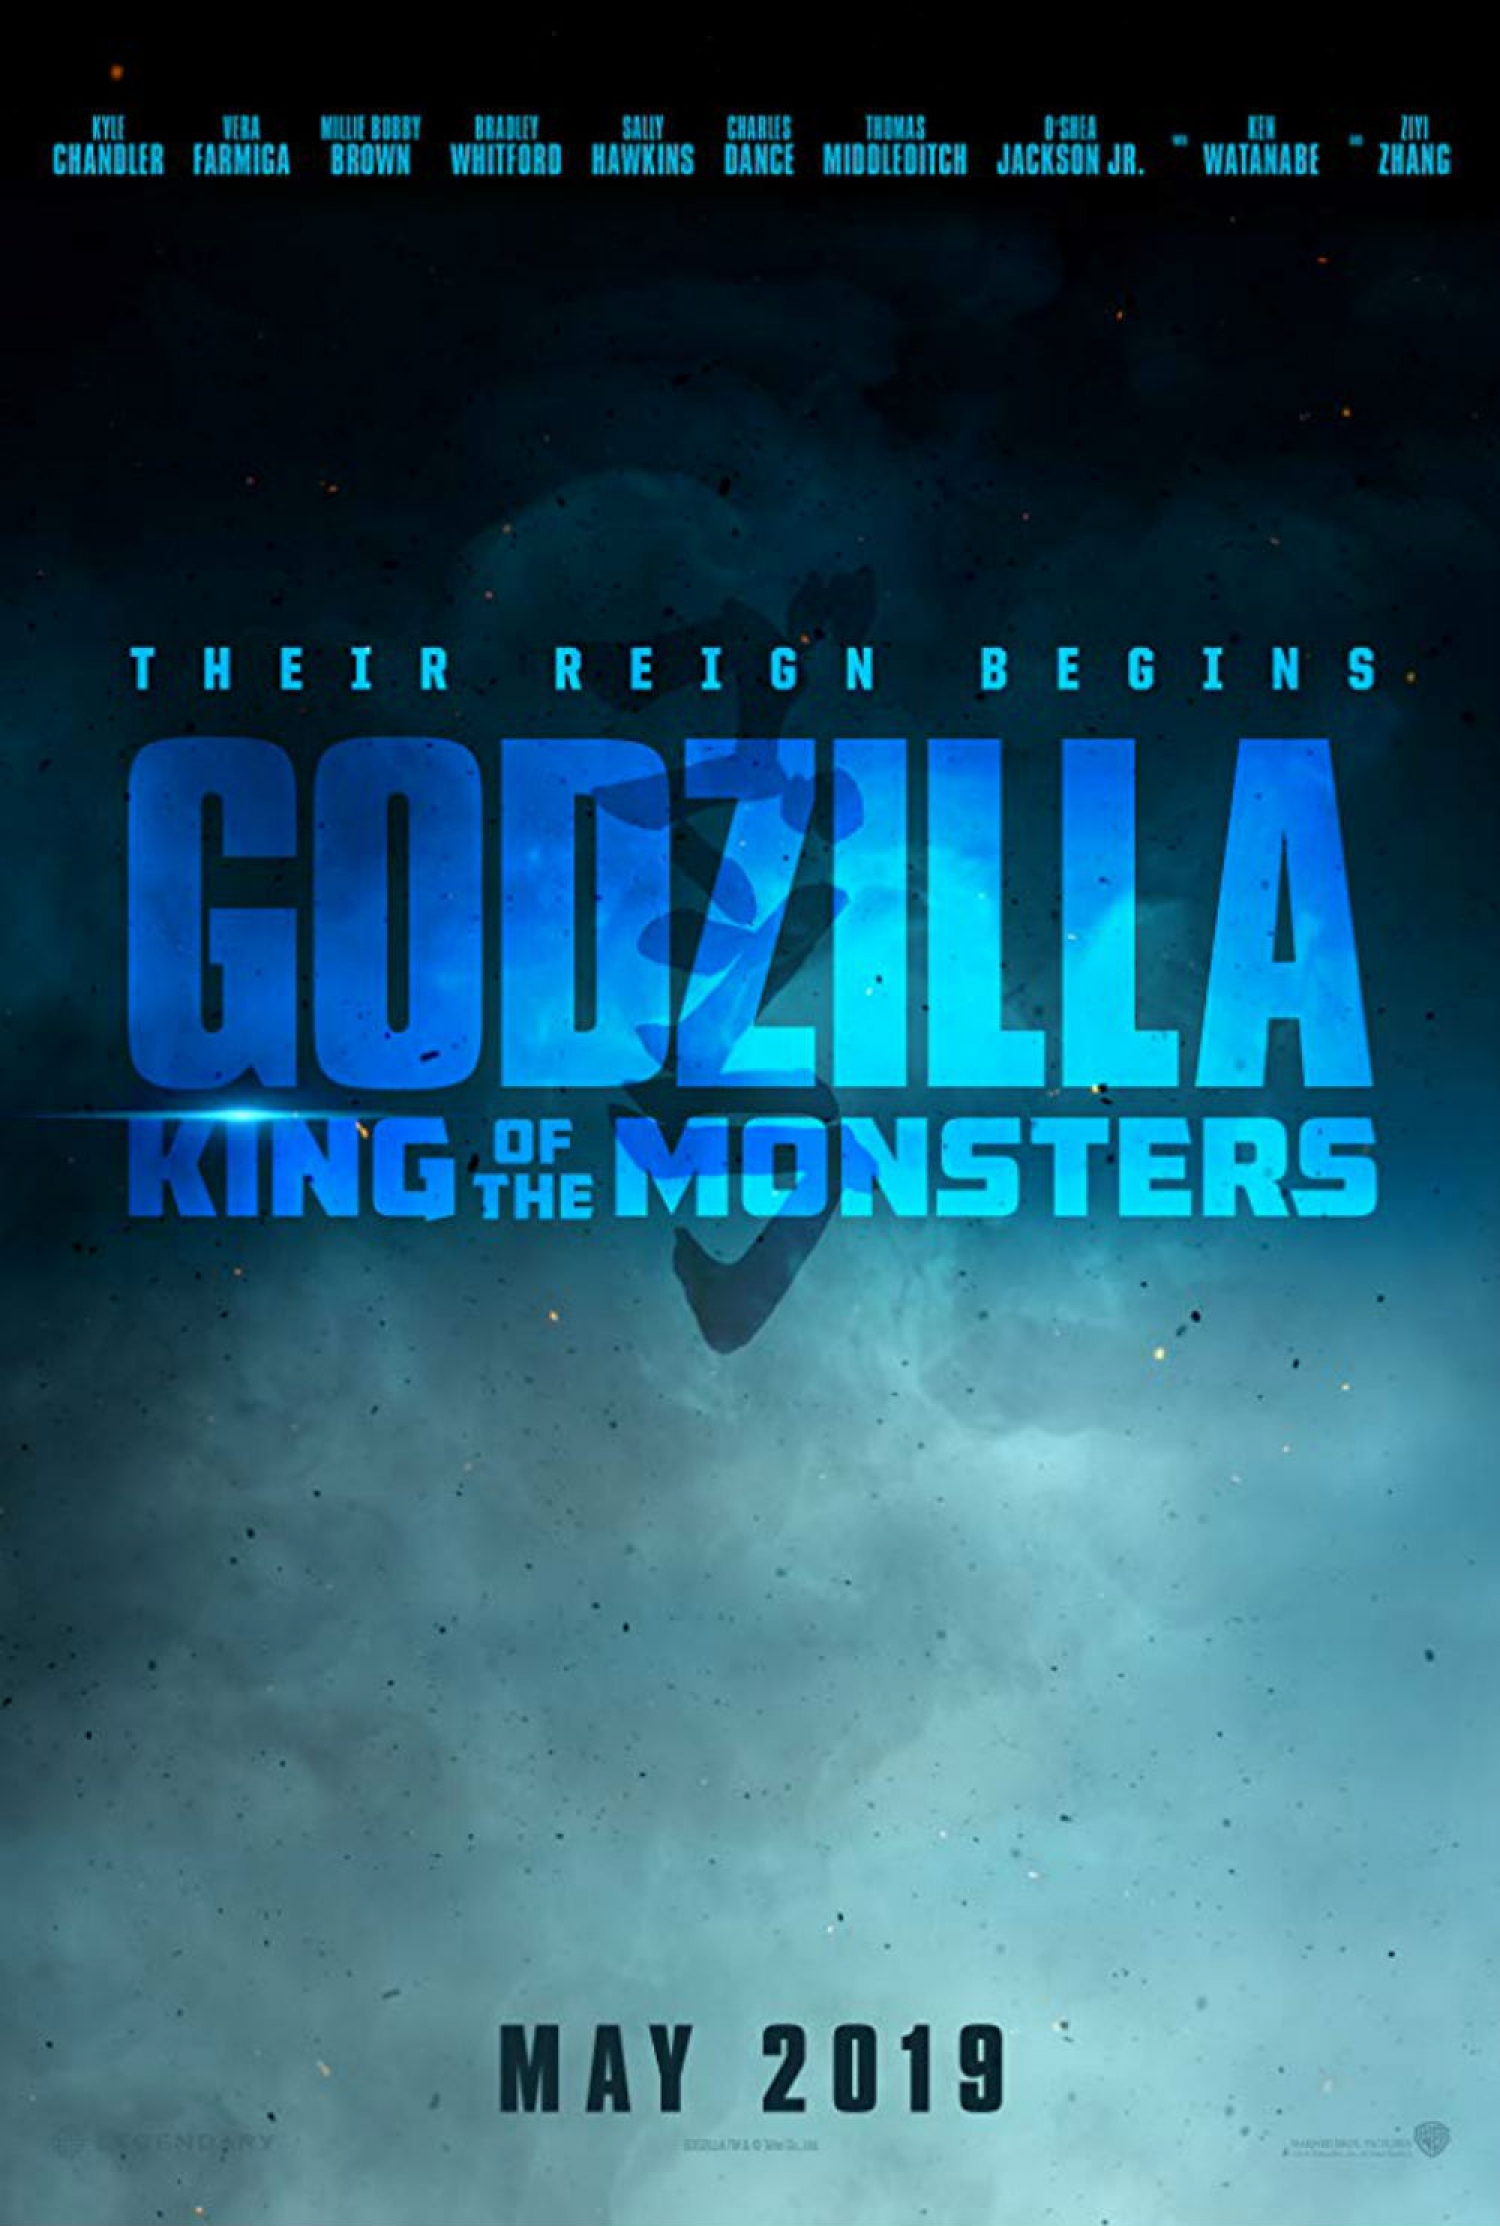 Godzilla: King Of The Monsters High Res Image. Cosmic Book News